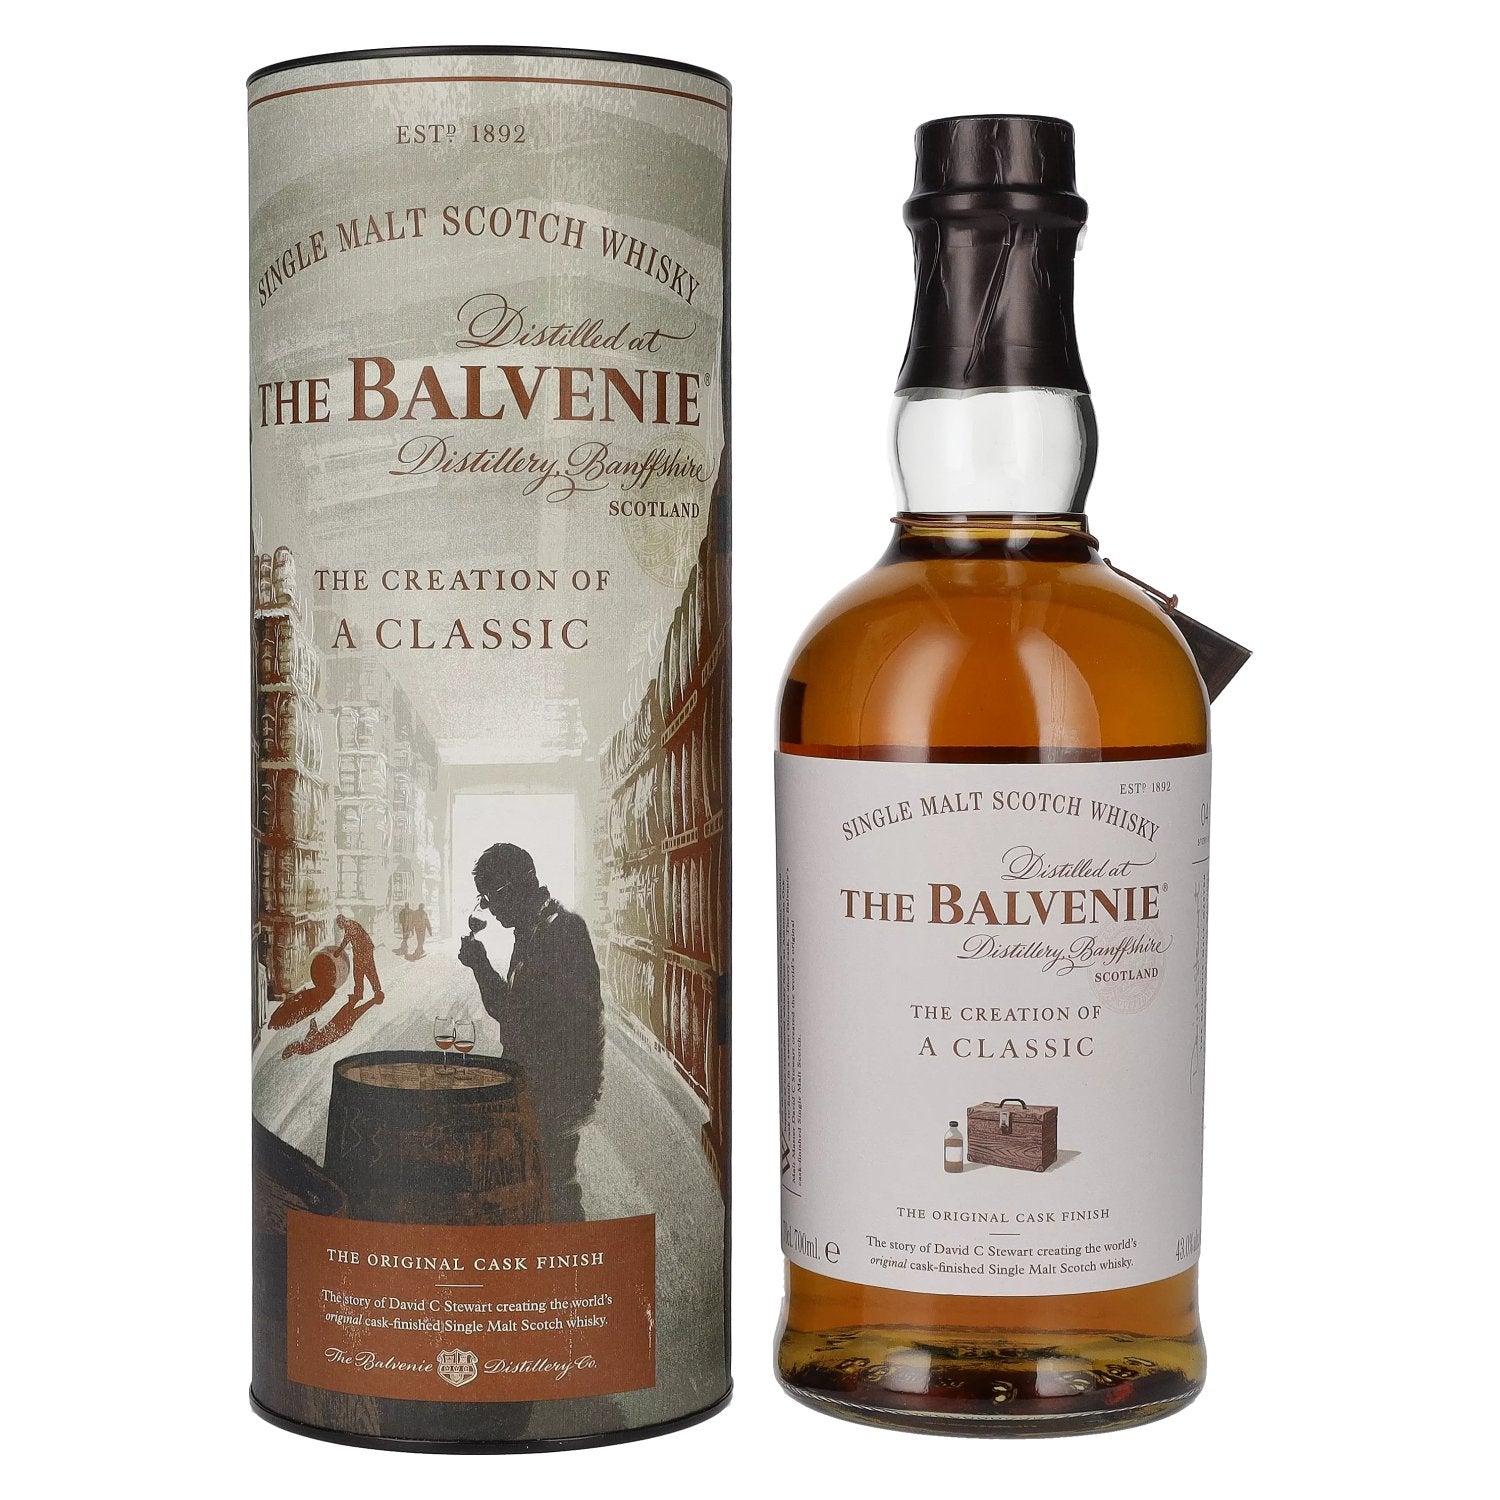 The Balvenie THE CREATION OF A CLASSIC 43% Vol. 0,7l in Giftbox